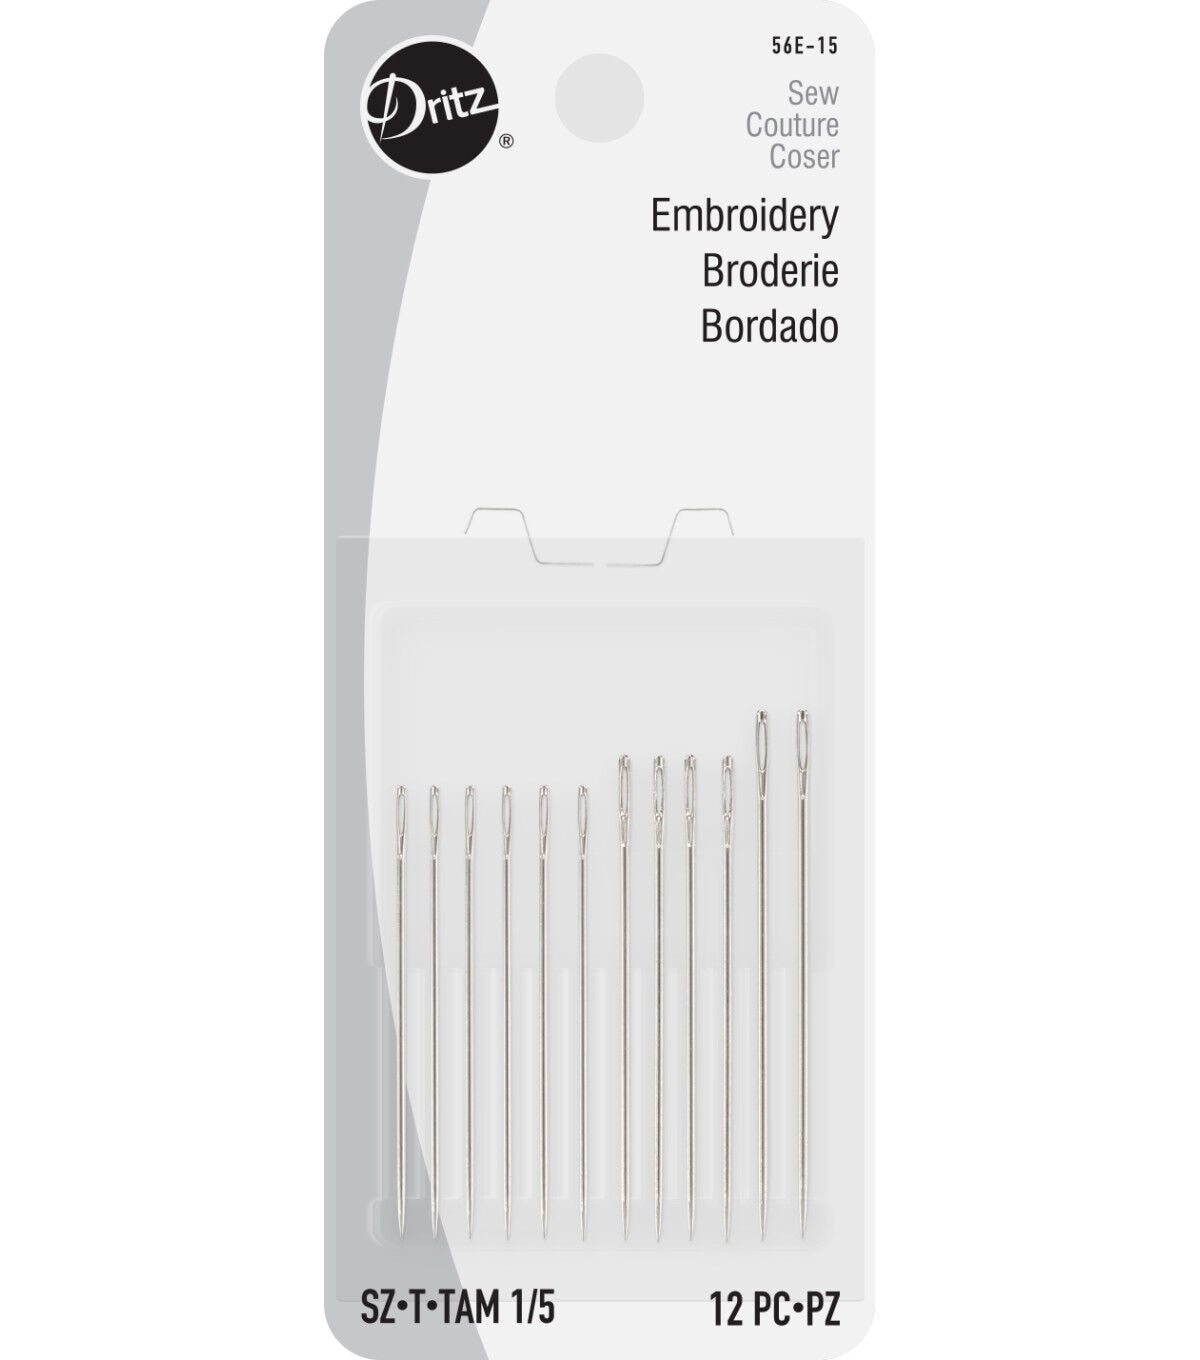 Dritz Embroidery Hand Needles, 3/9 - 16 count